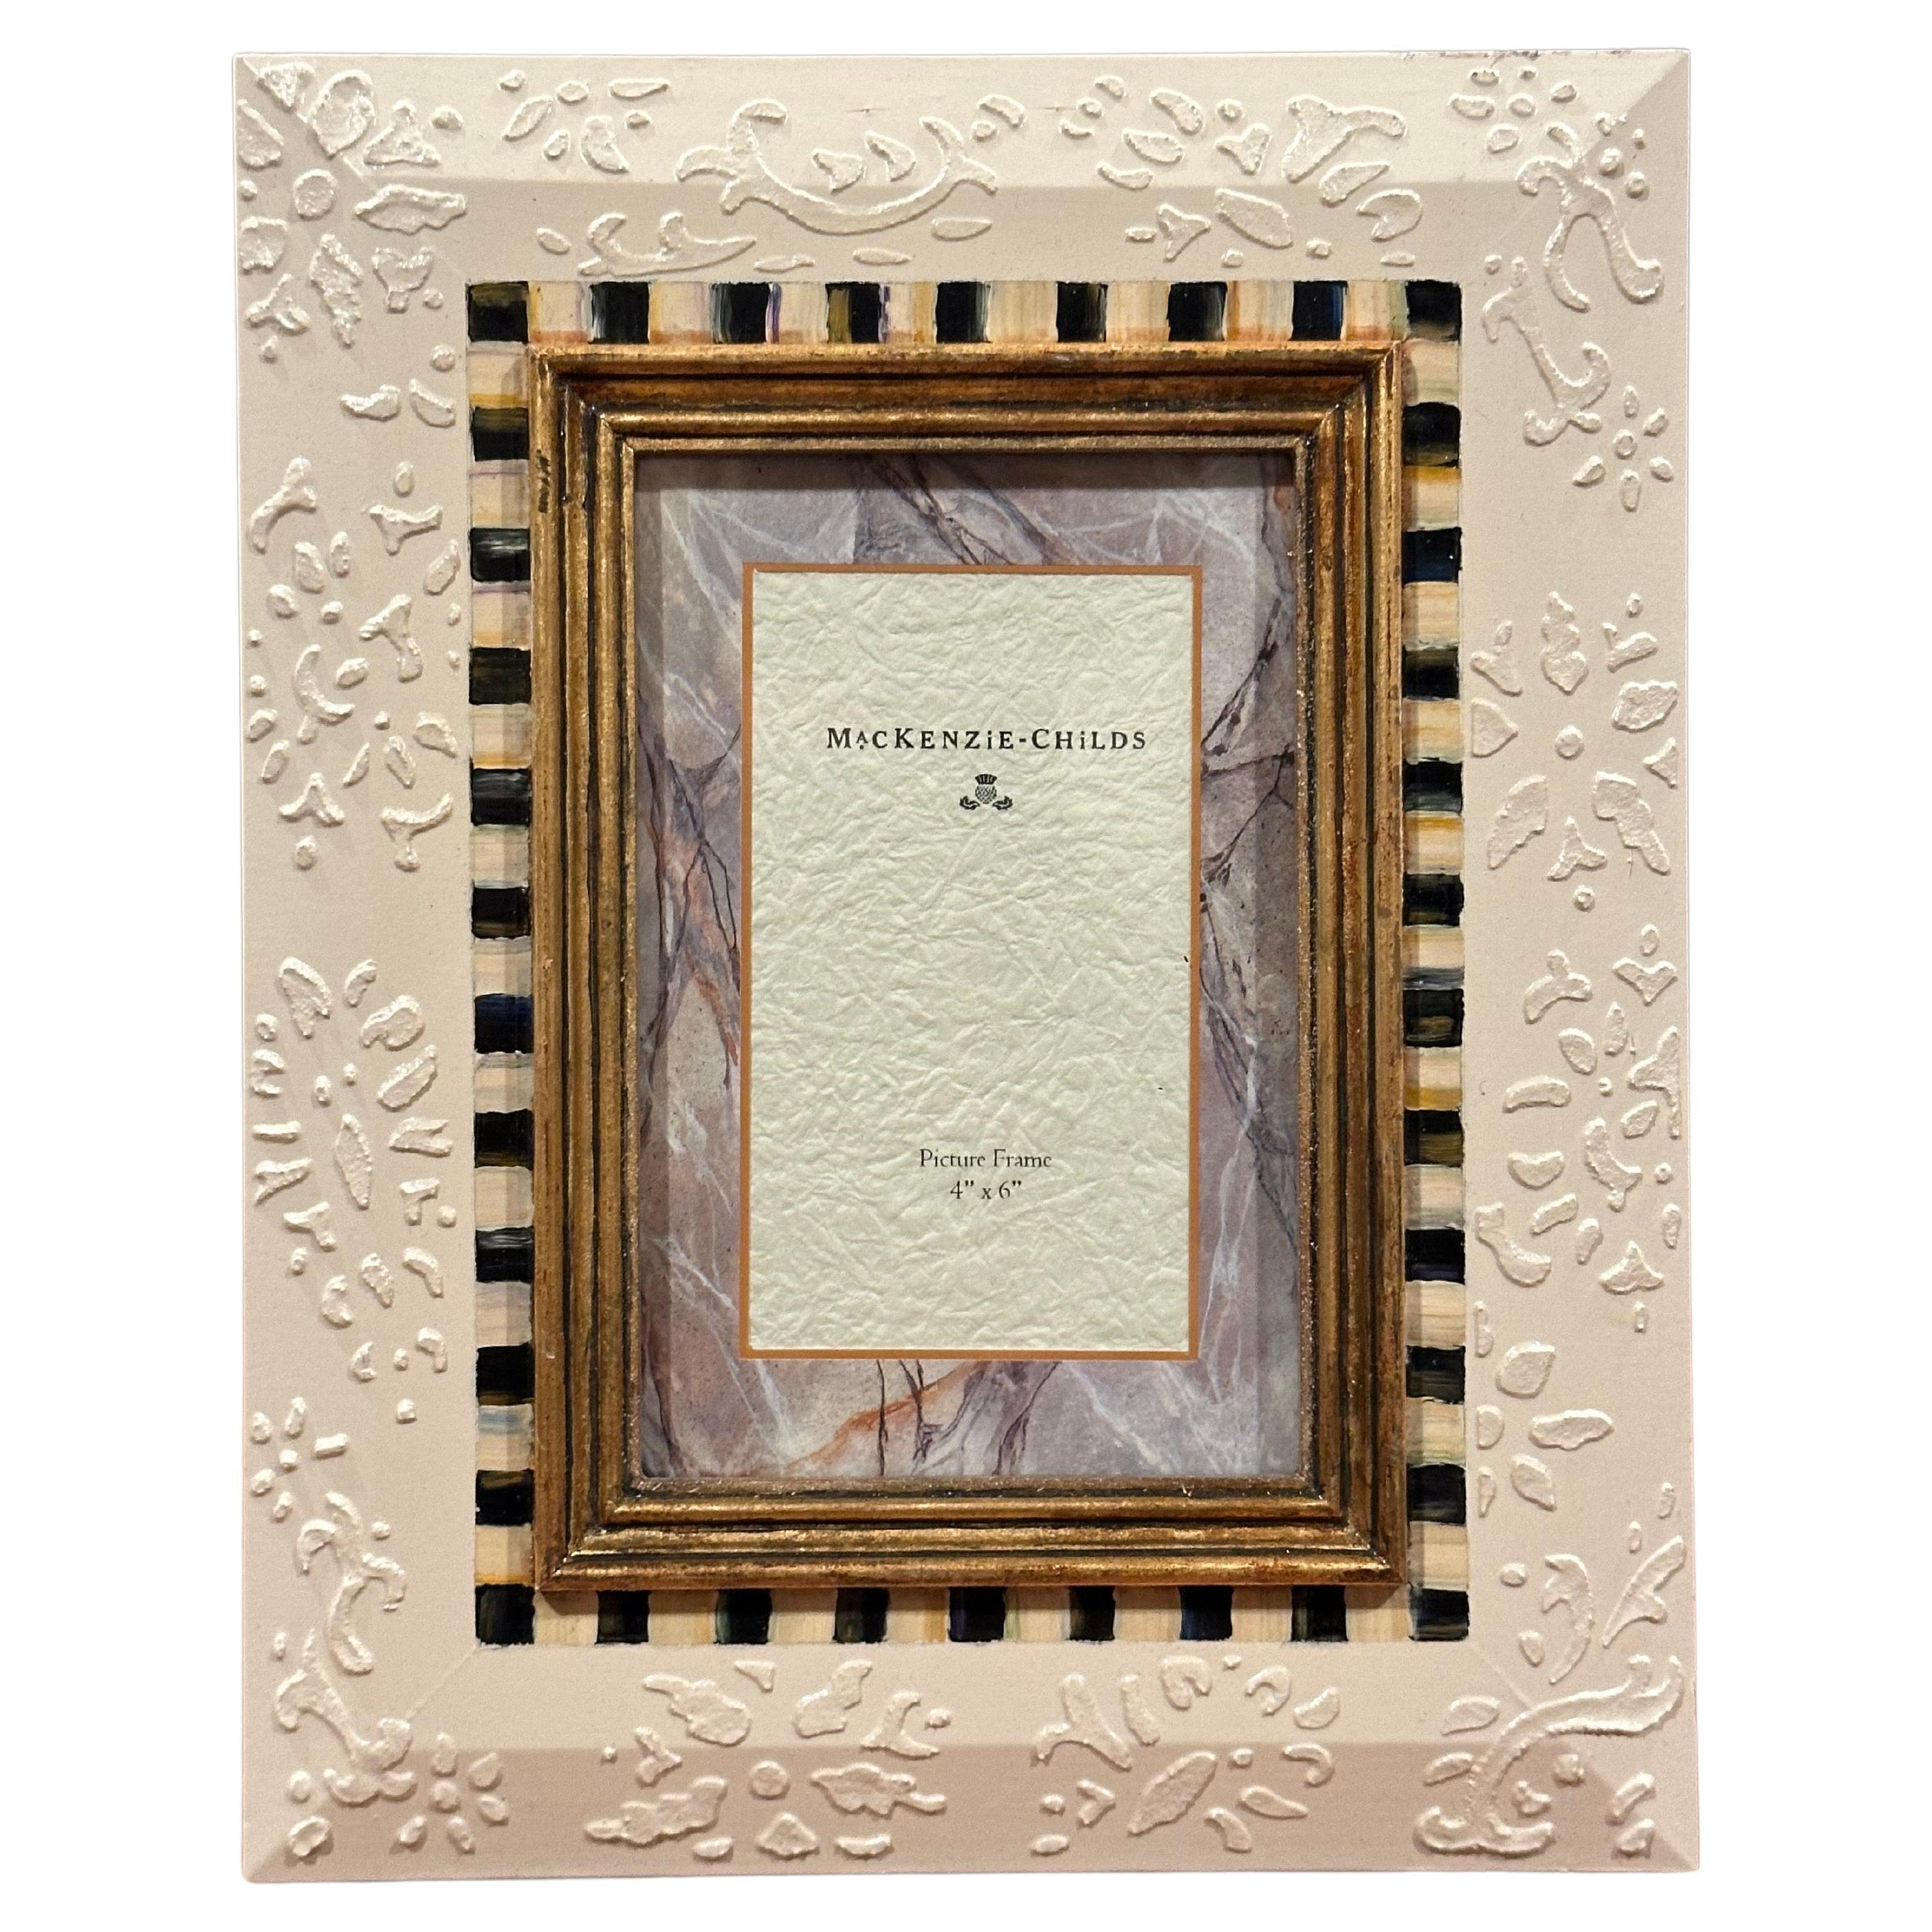 20th Century Hand Painted Picture Frame by MacKenzie Childs For Sale